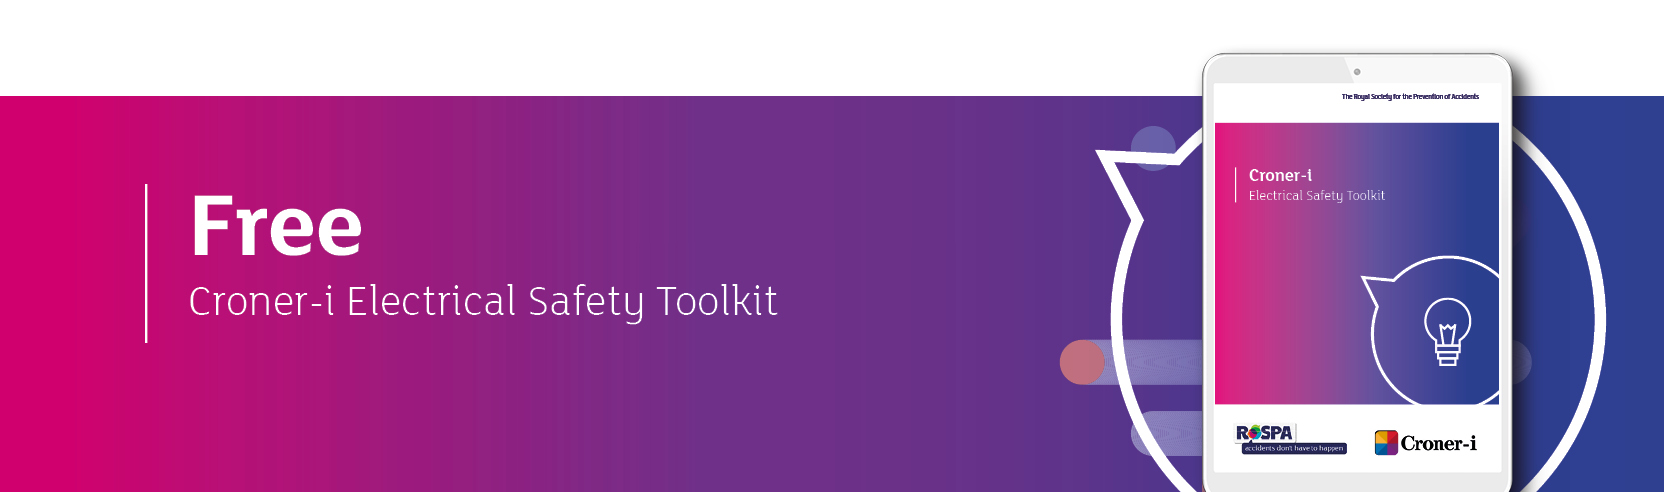 Free Croner-i Electrical Safety Toolkit.png